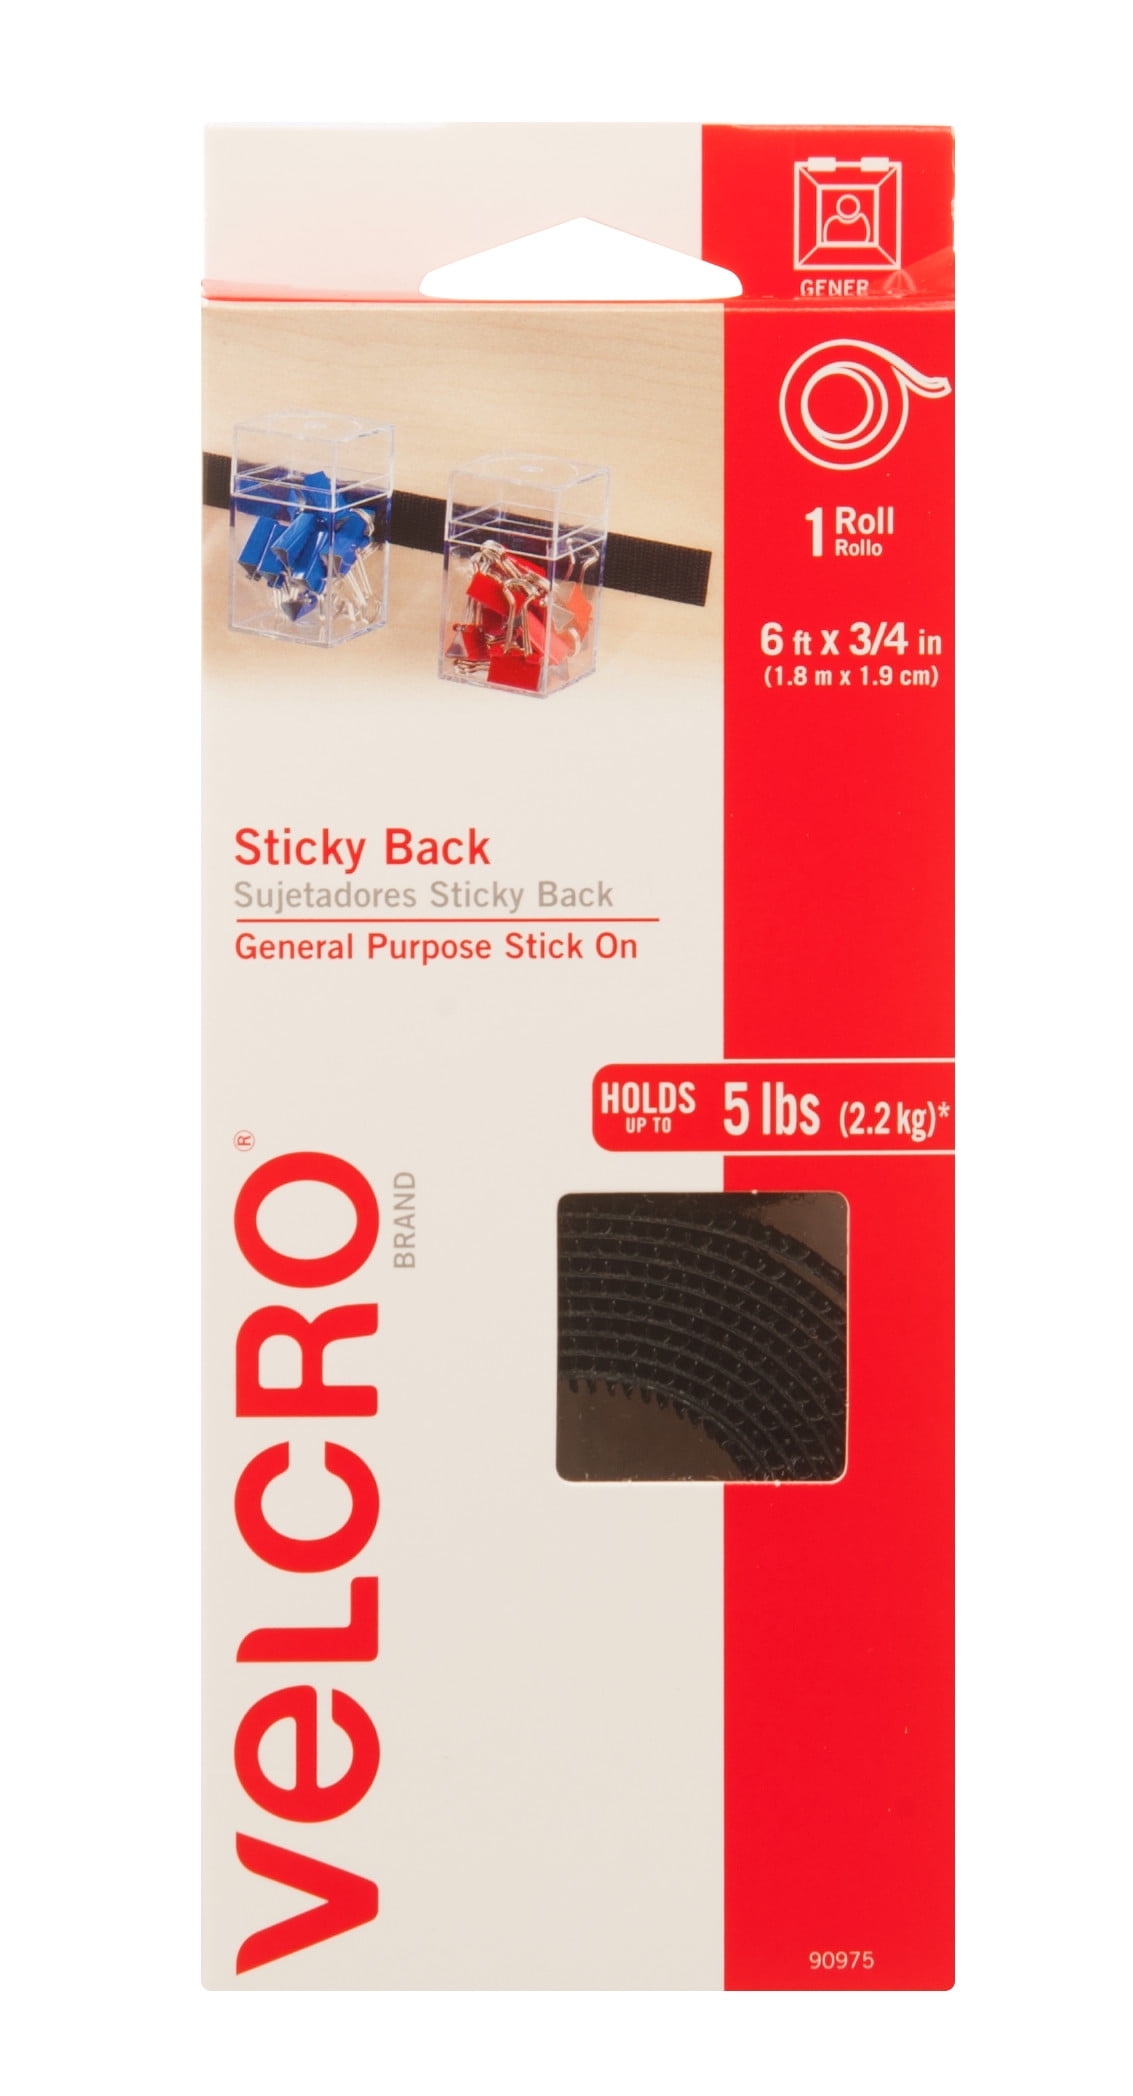 VELCRO Brand Sticky Back Tape Roll with Adhesive | Cut Strips to Length | Hook and Loop Fasteners | Perfect for Home, Office or Classroom, 6' x 3/4" Black, 90975W